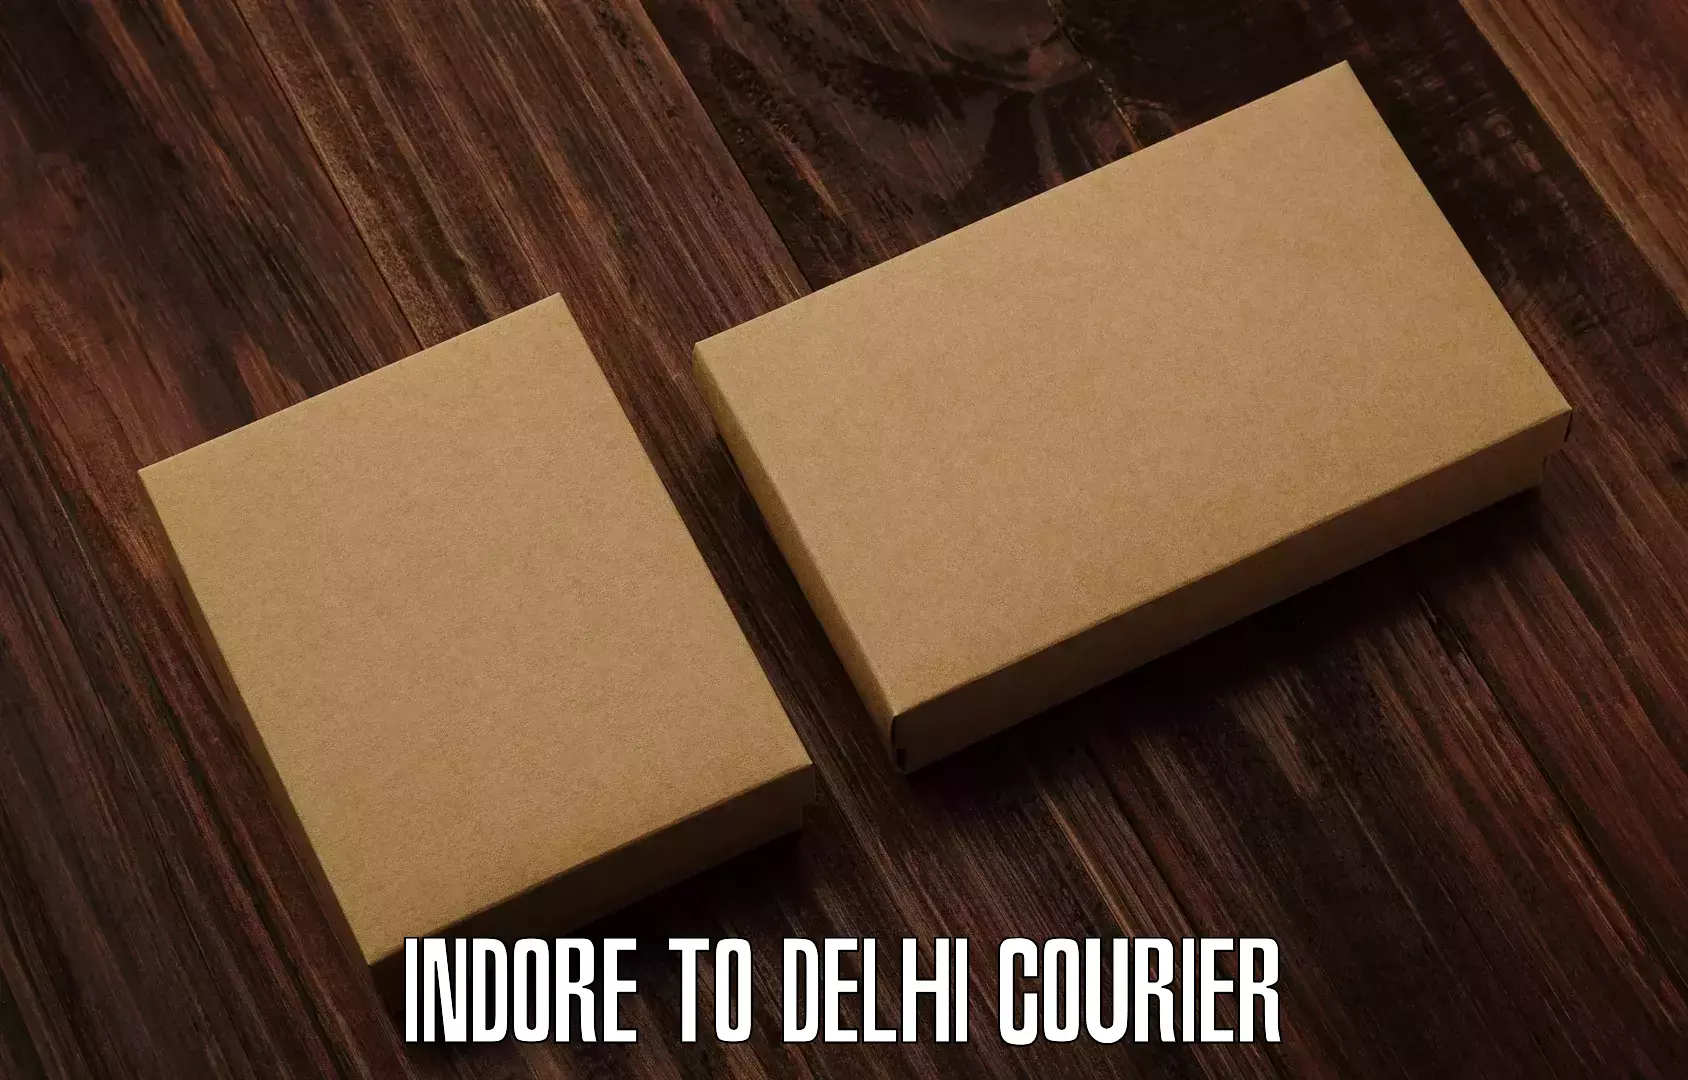 Nationwide parcel services Indore to Delhi